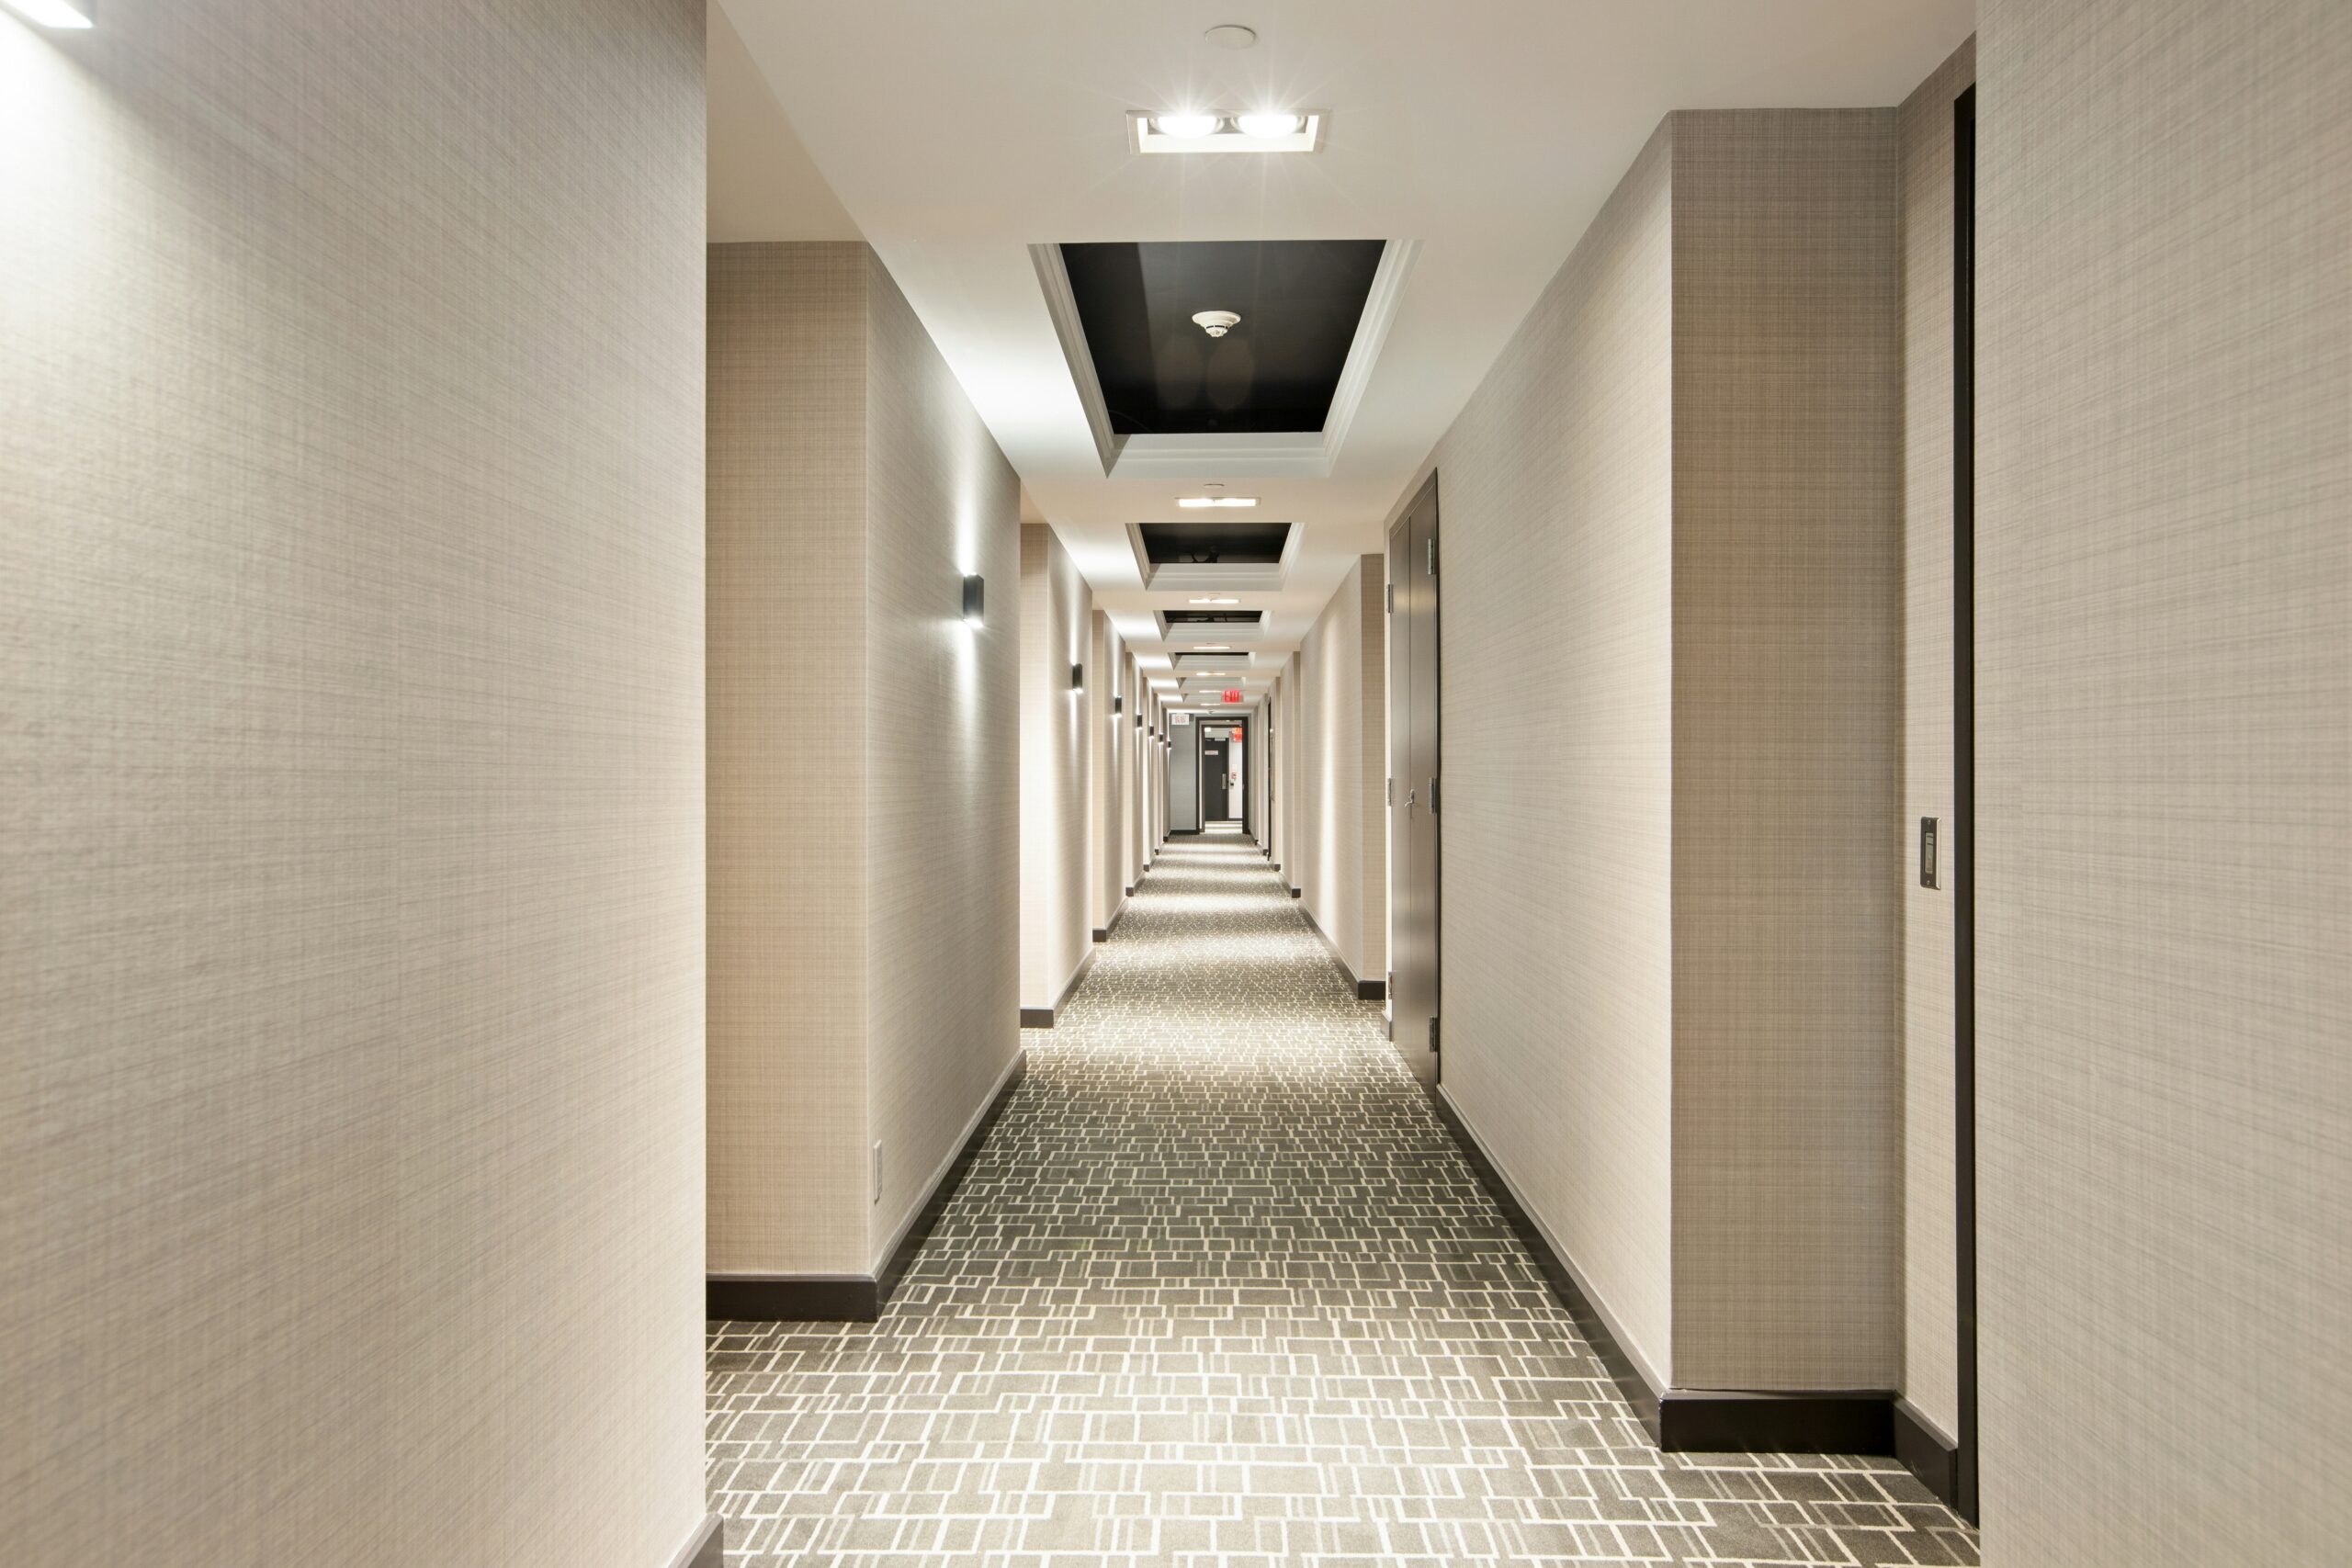 How to Achieve the Luxury Hotel Hallway Vibe's featured image